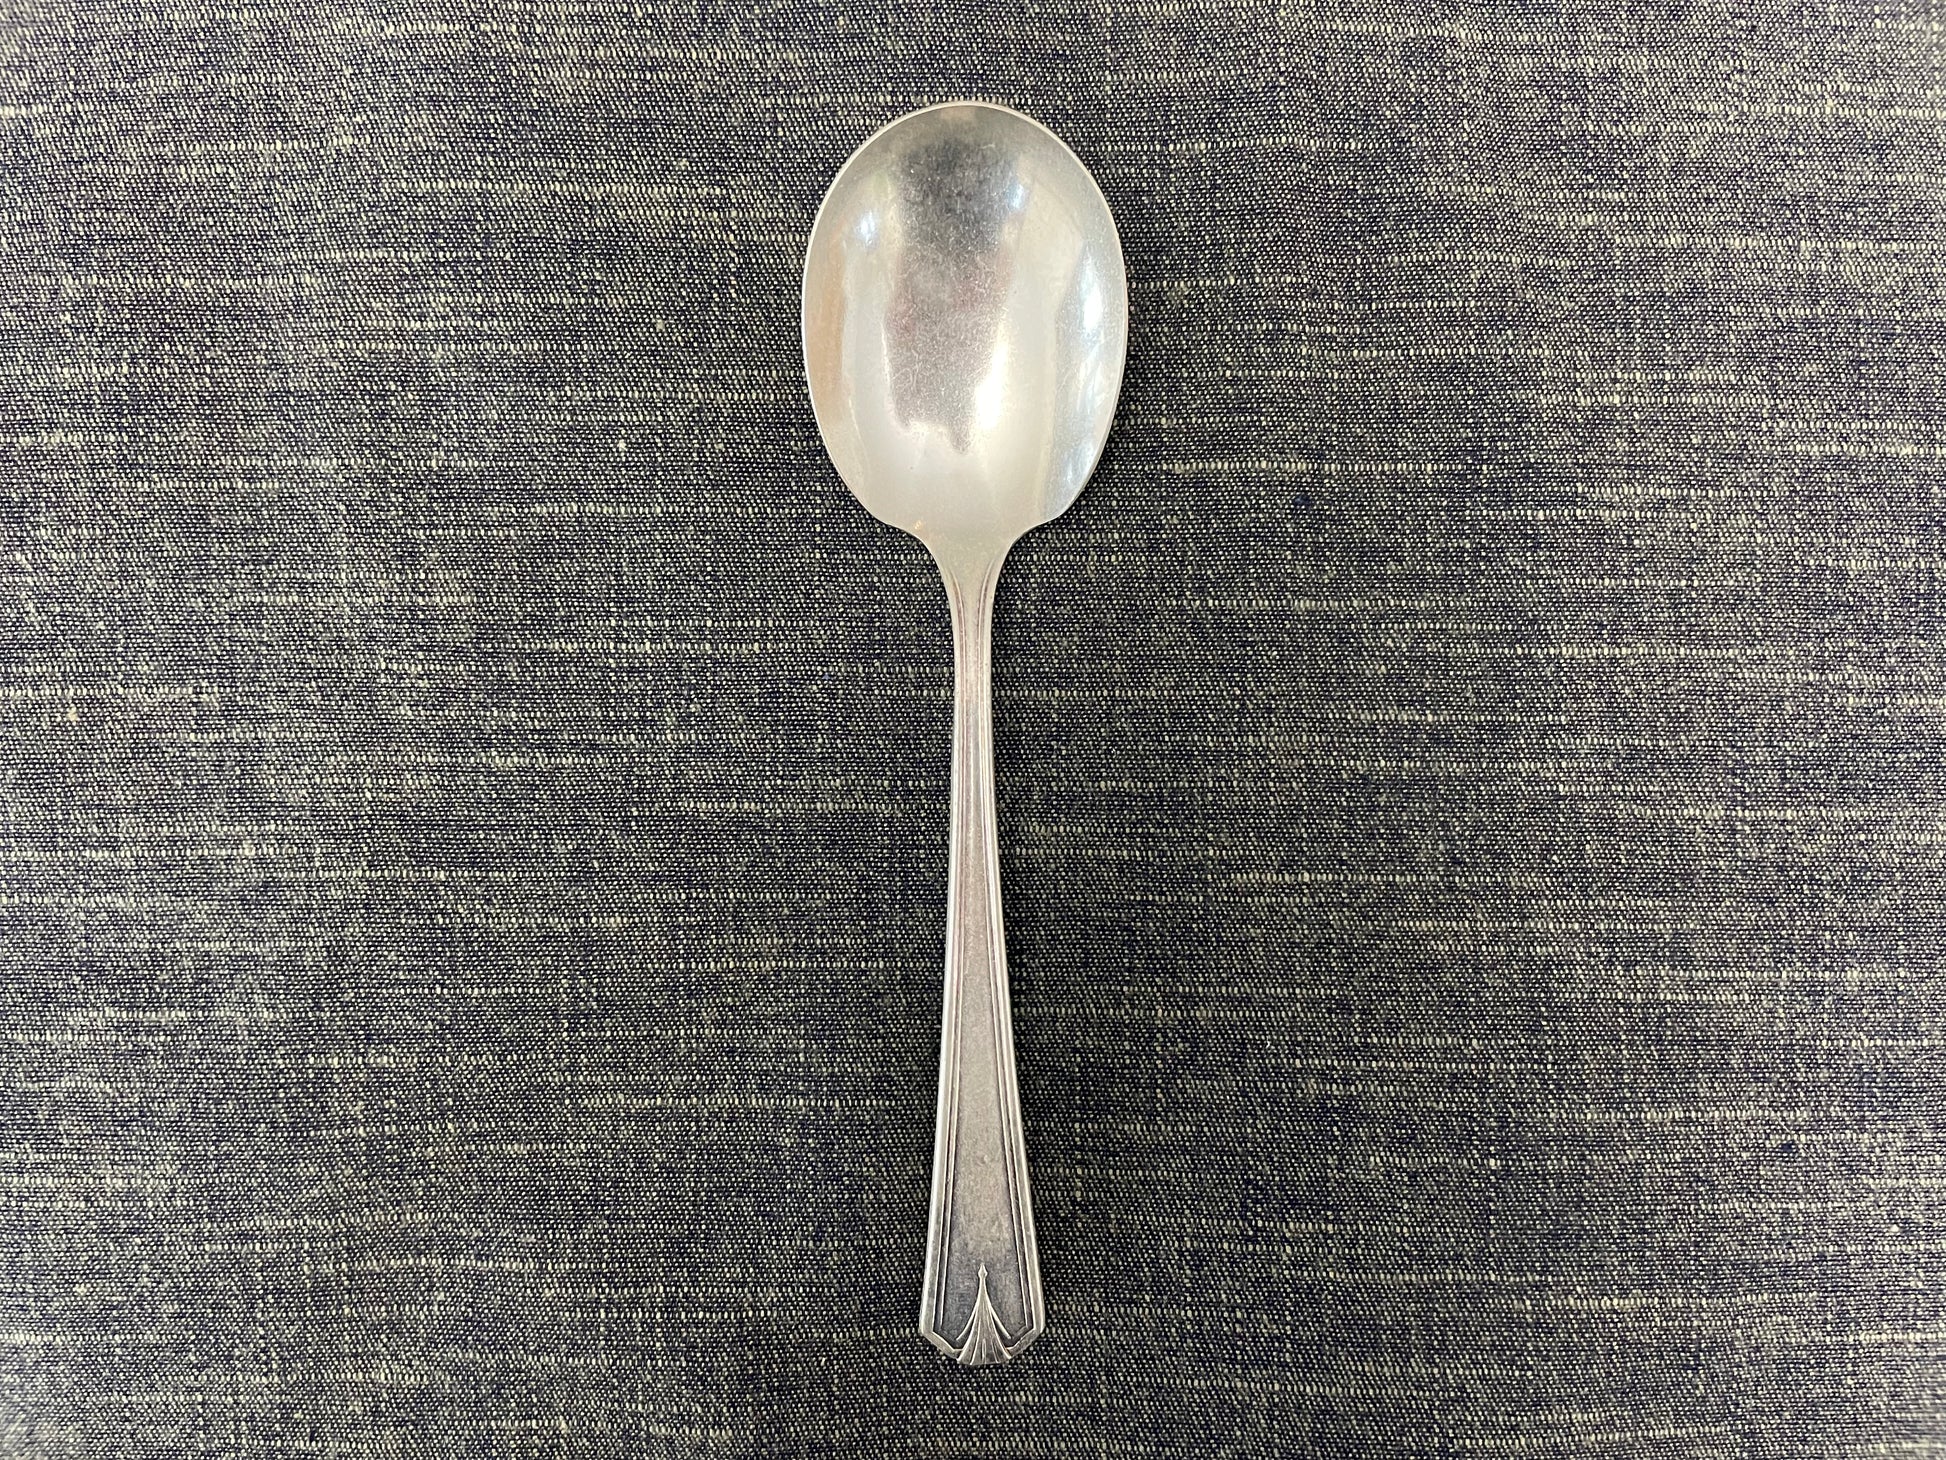 antique silver spoon for serving or prop photography